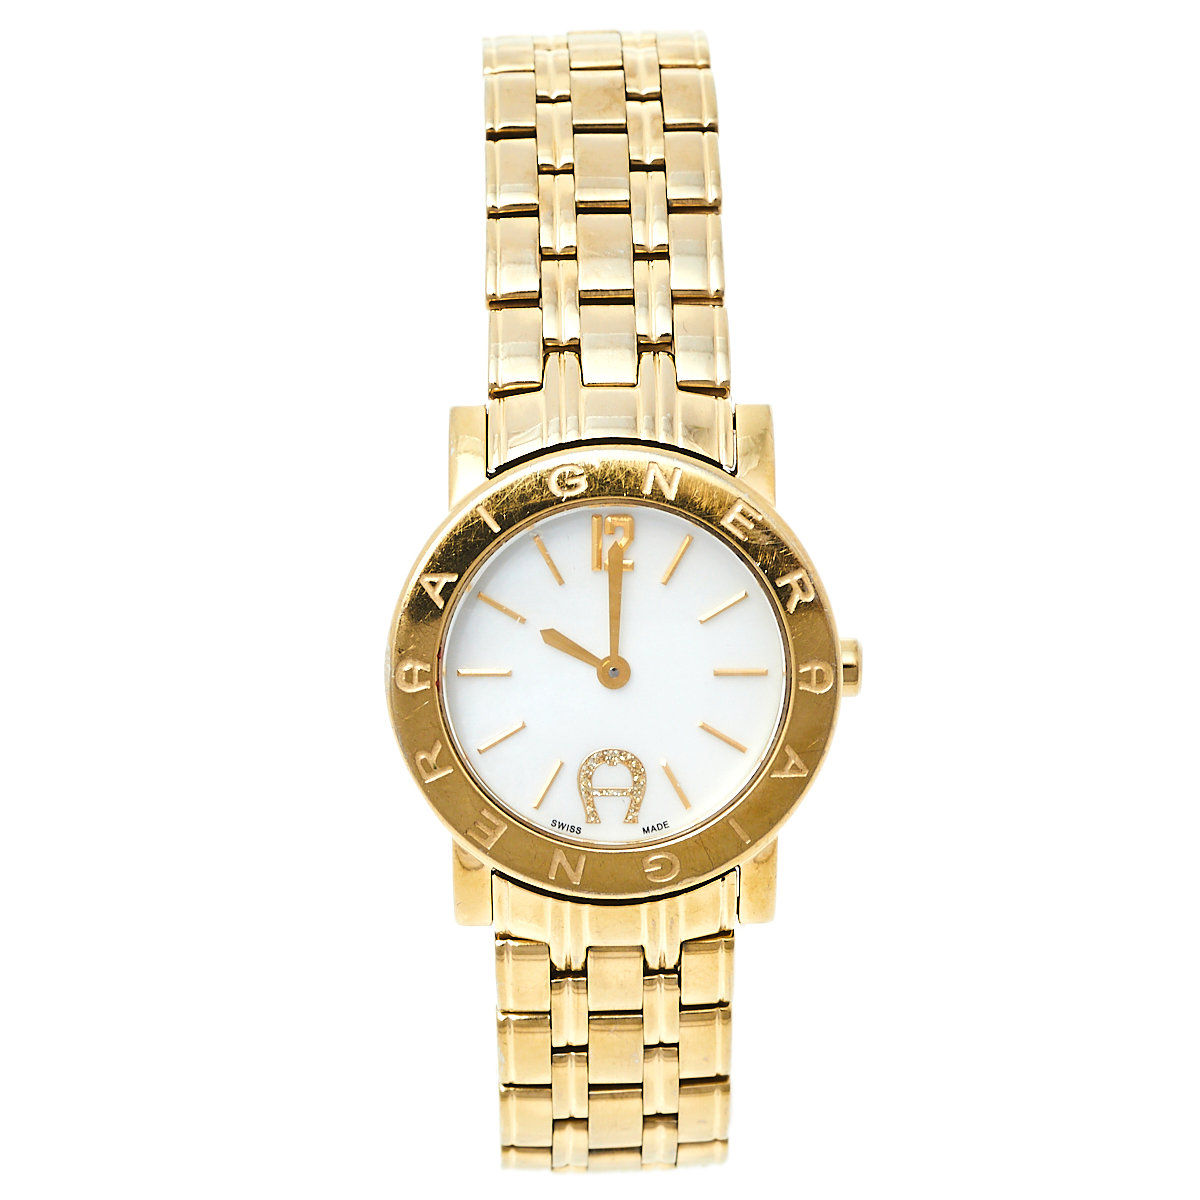 Aigner White Mother of Pearl Gold Plated Stainless Steel Cortina A26200 Women's Wristwatch 29 mm